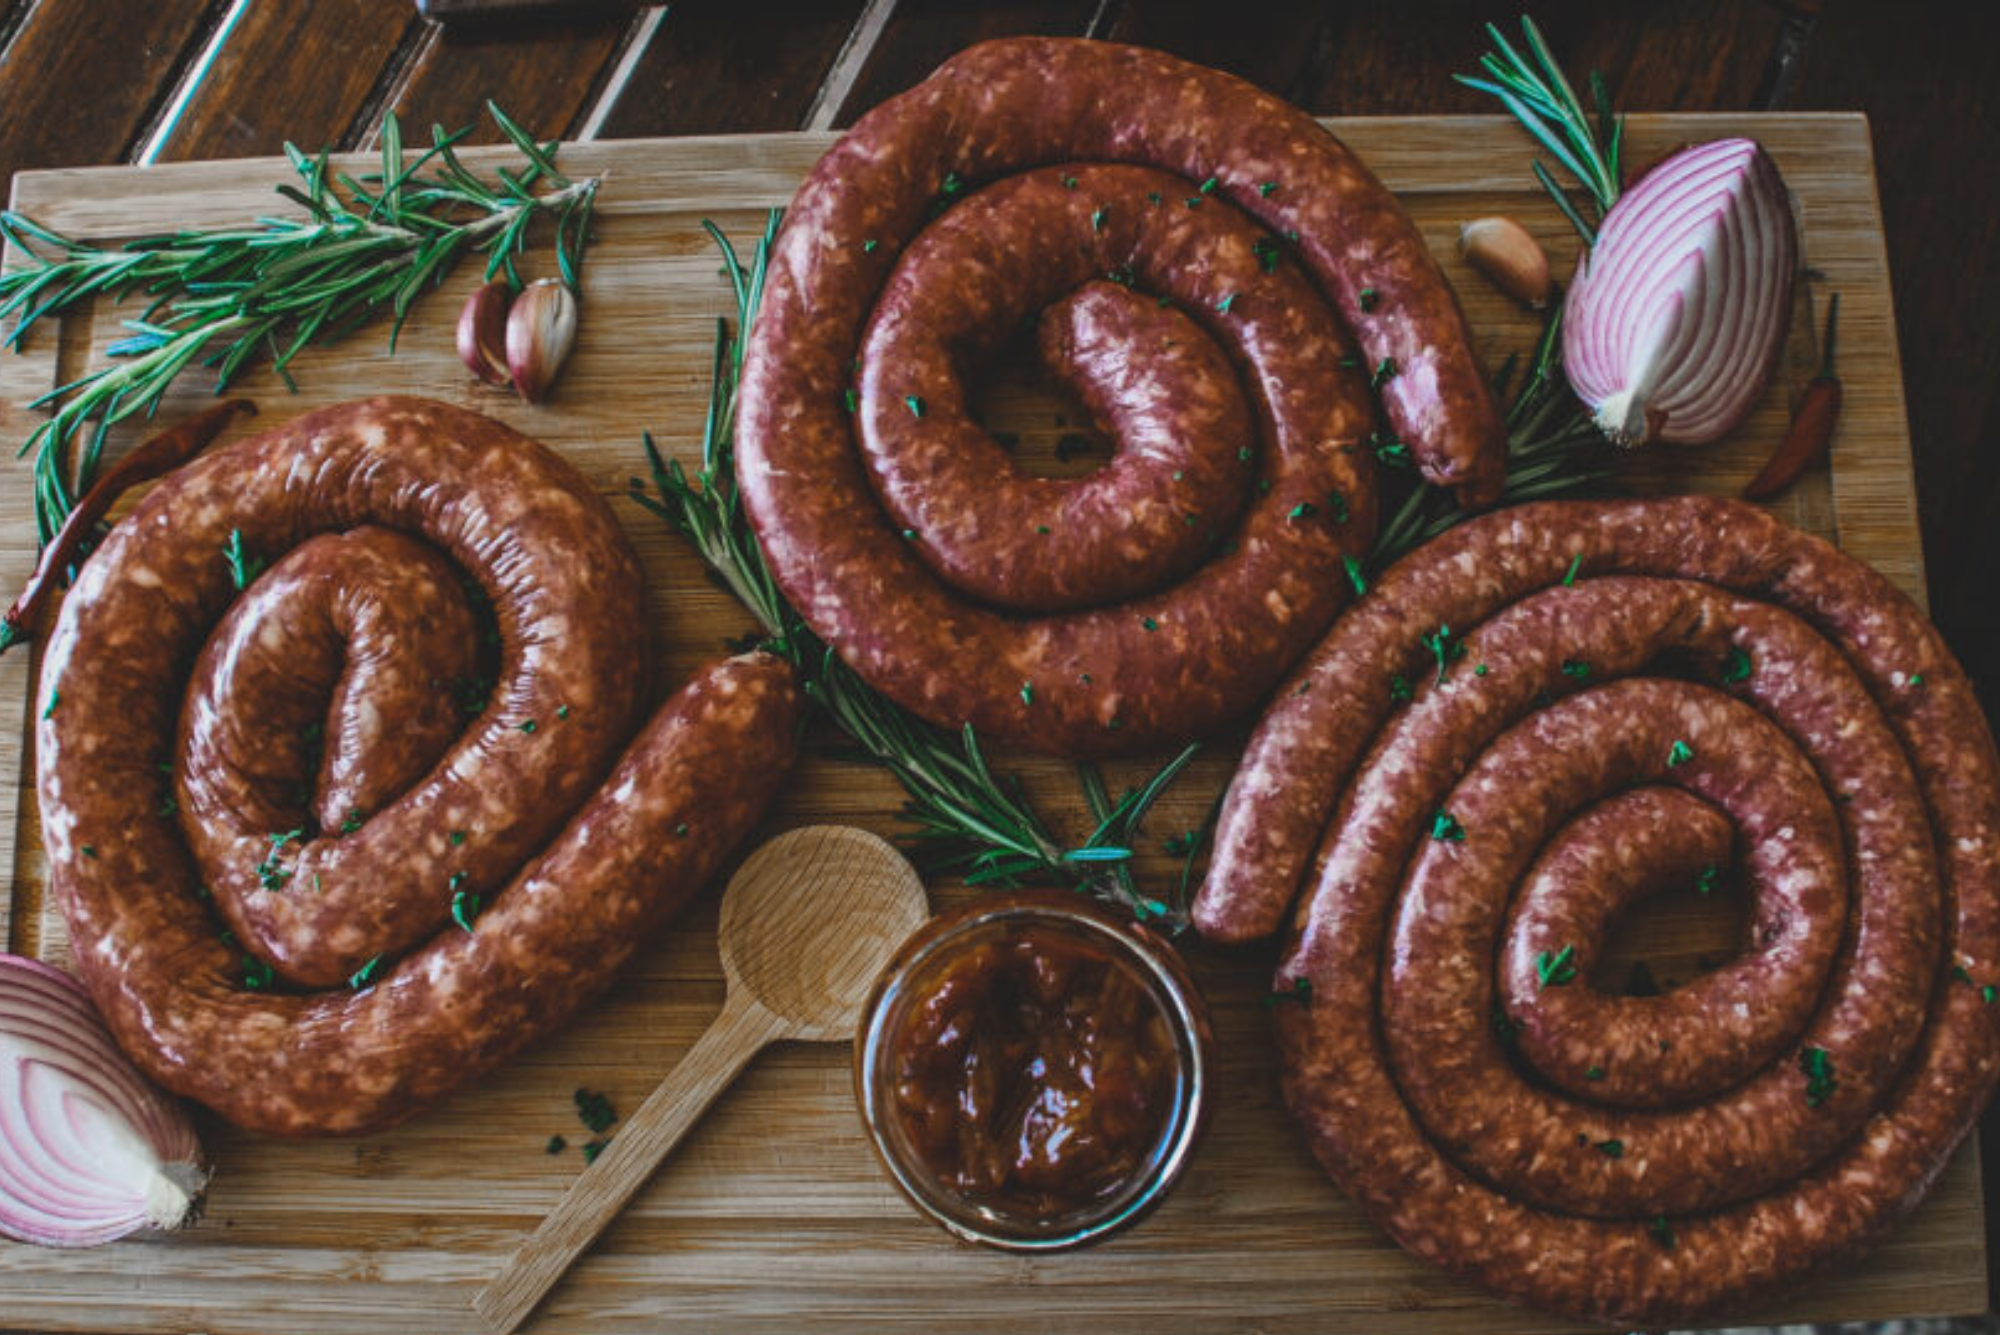 South African Boerewors from Scratch (pronounced boo-ruh-vors) 1